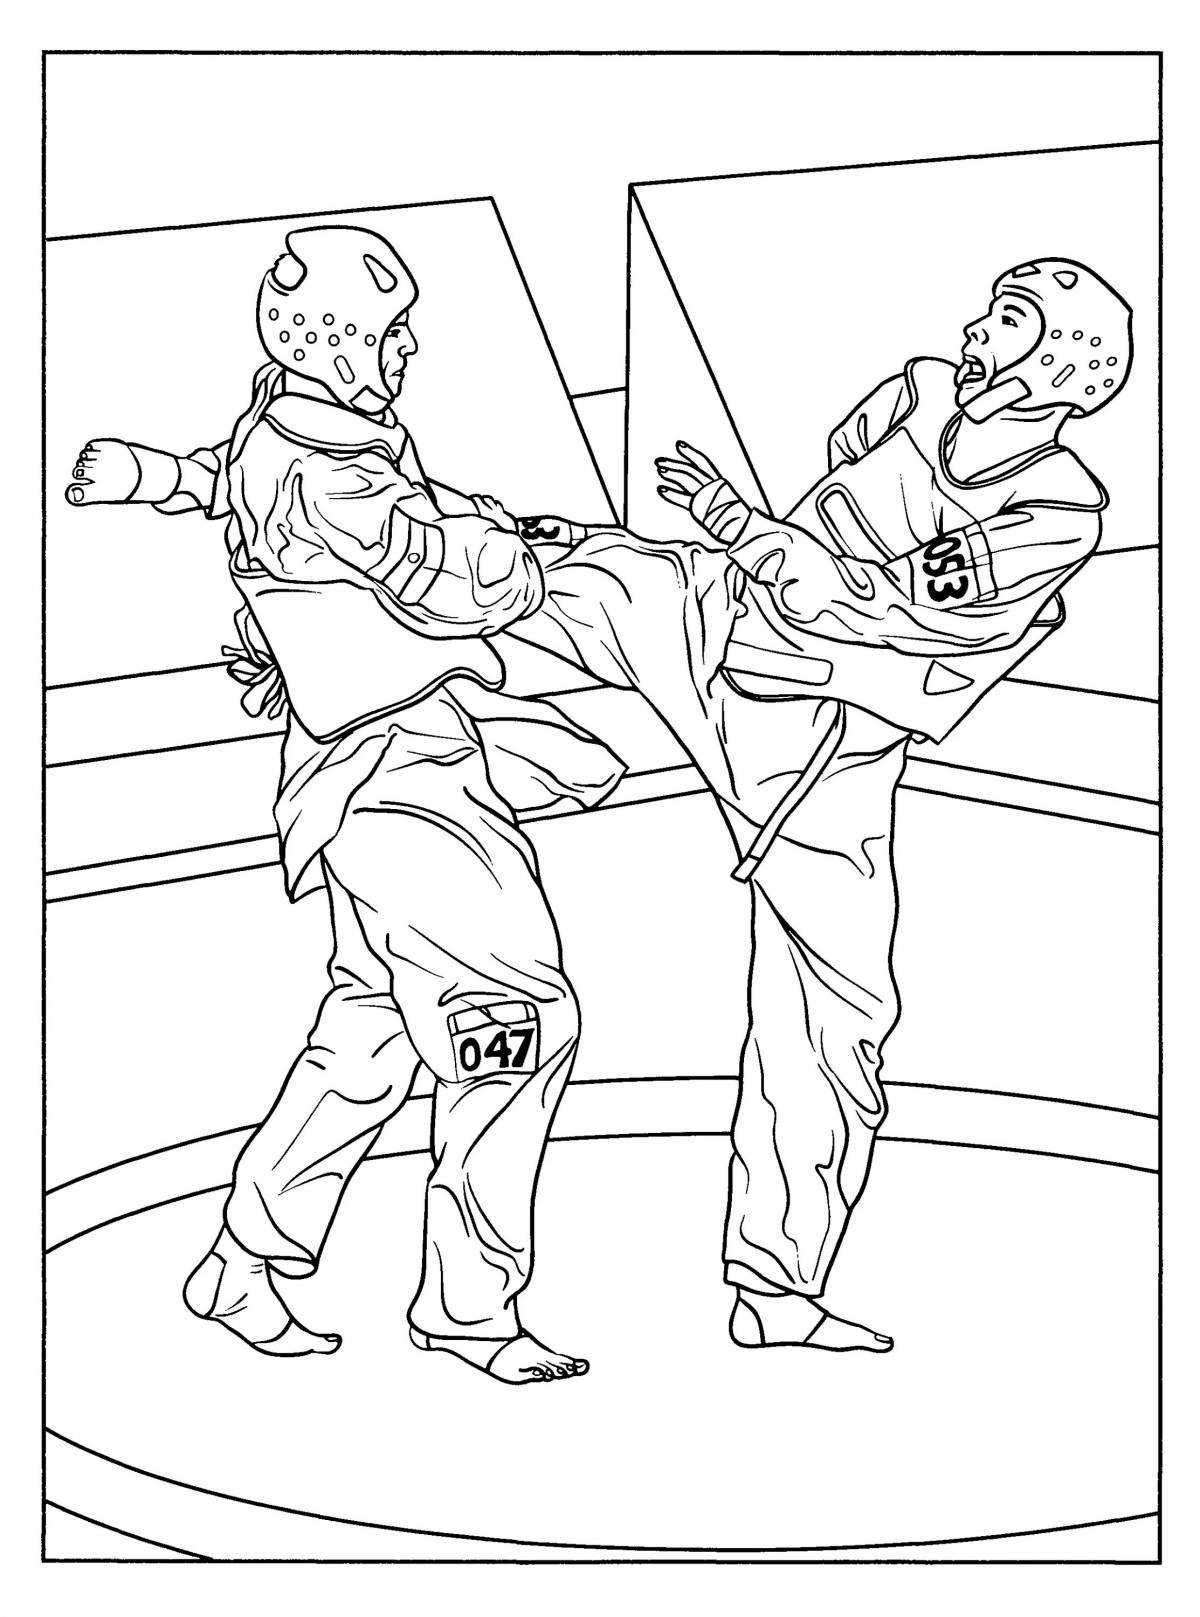 Funny boxing coloring book for kids